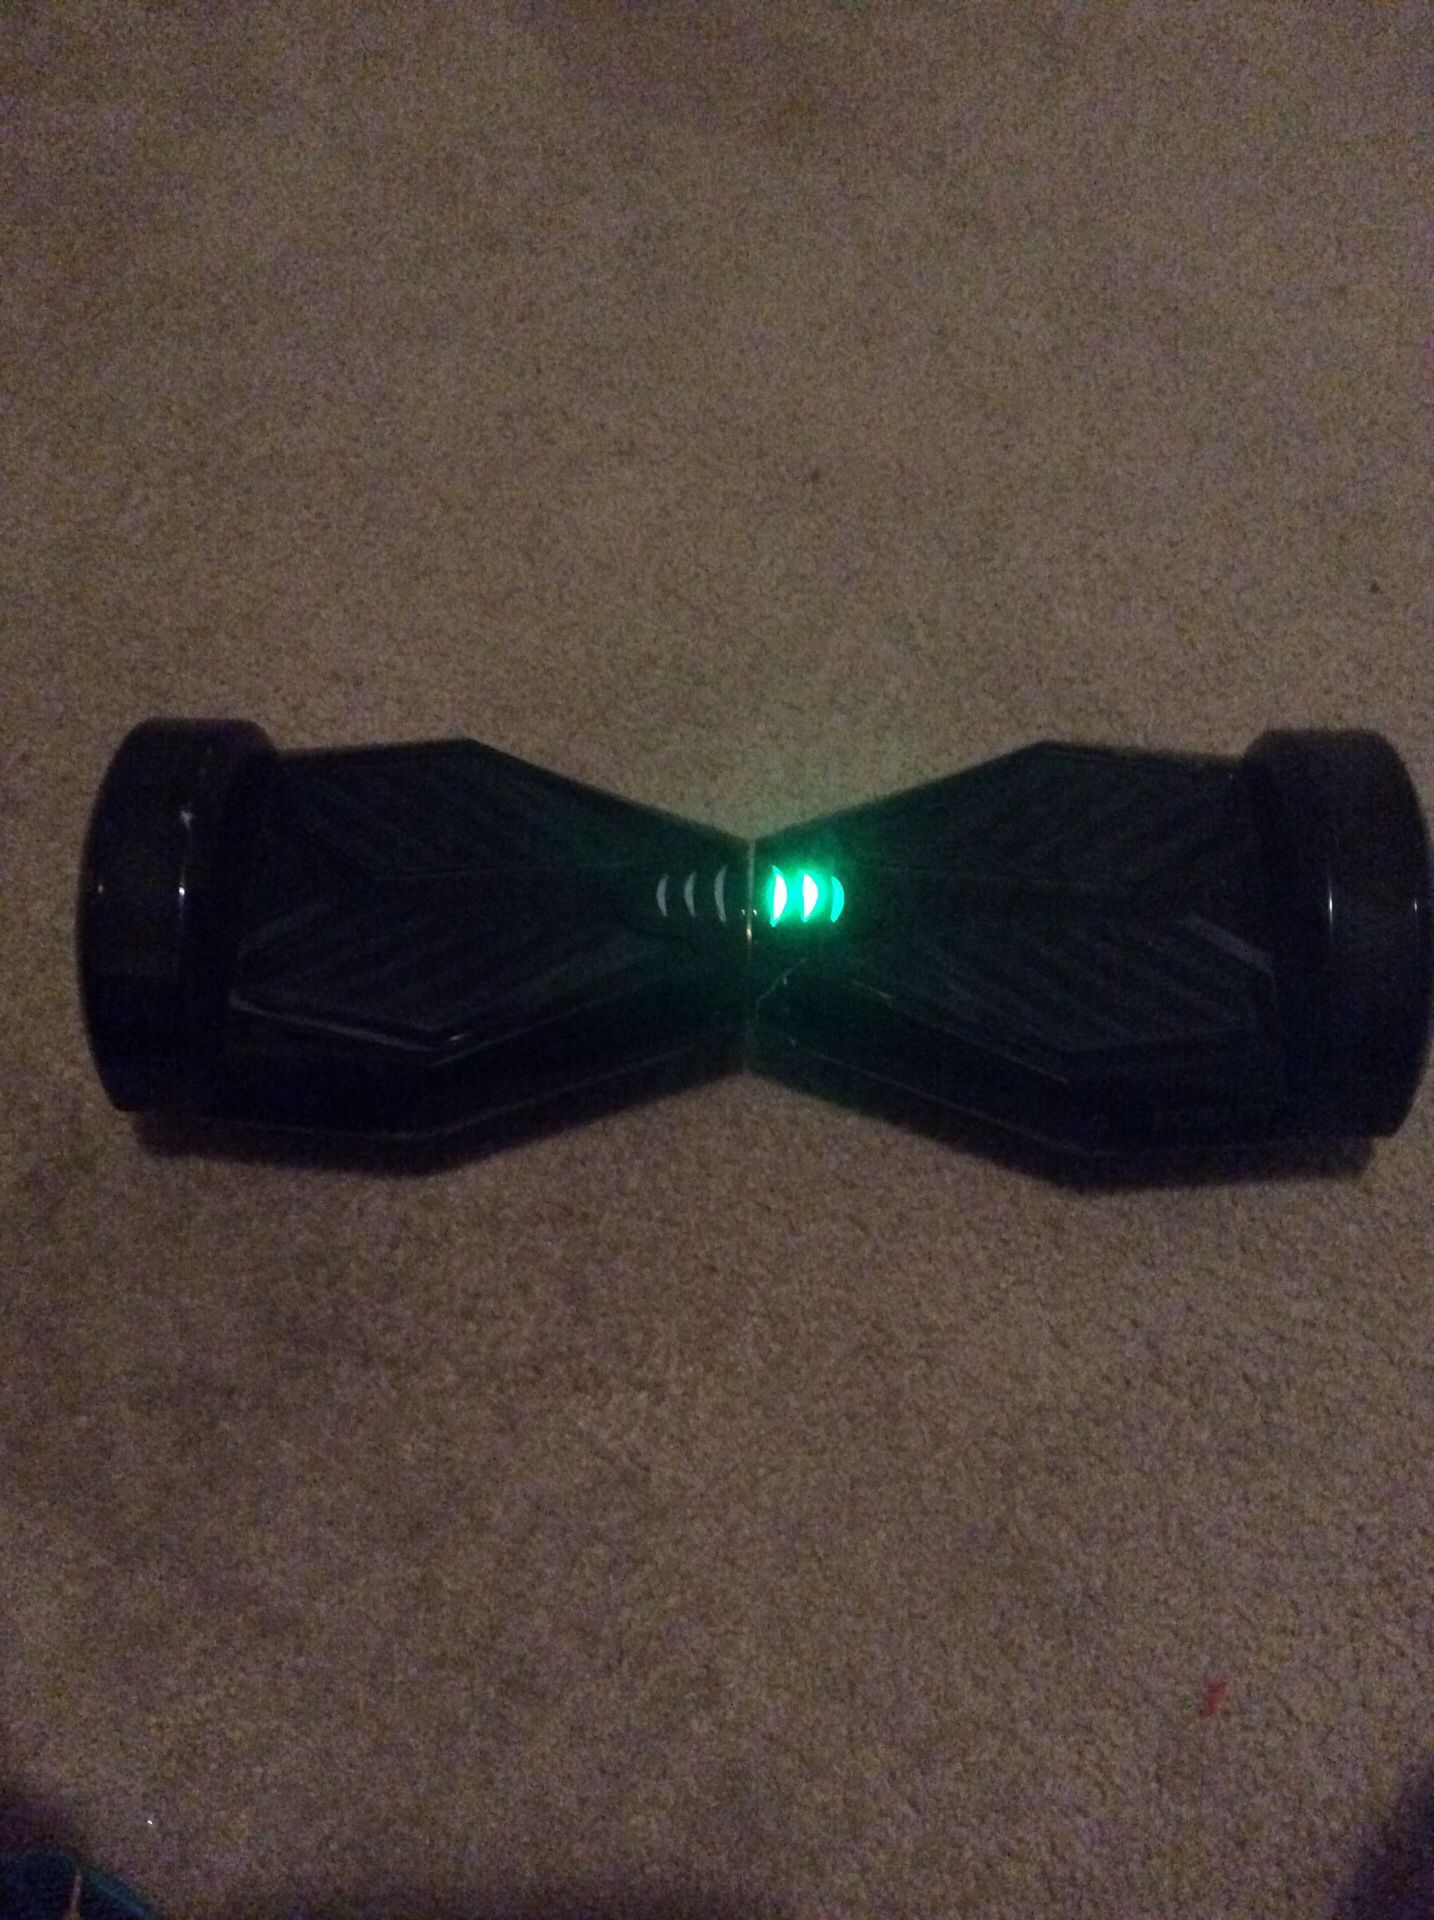 HoverBoard